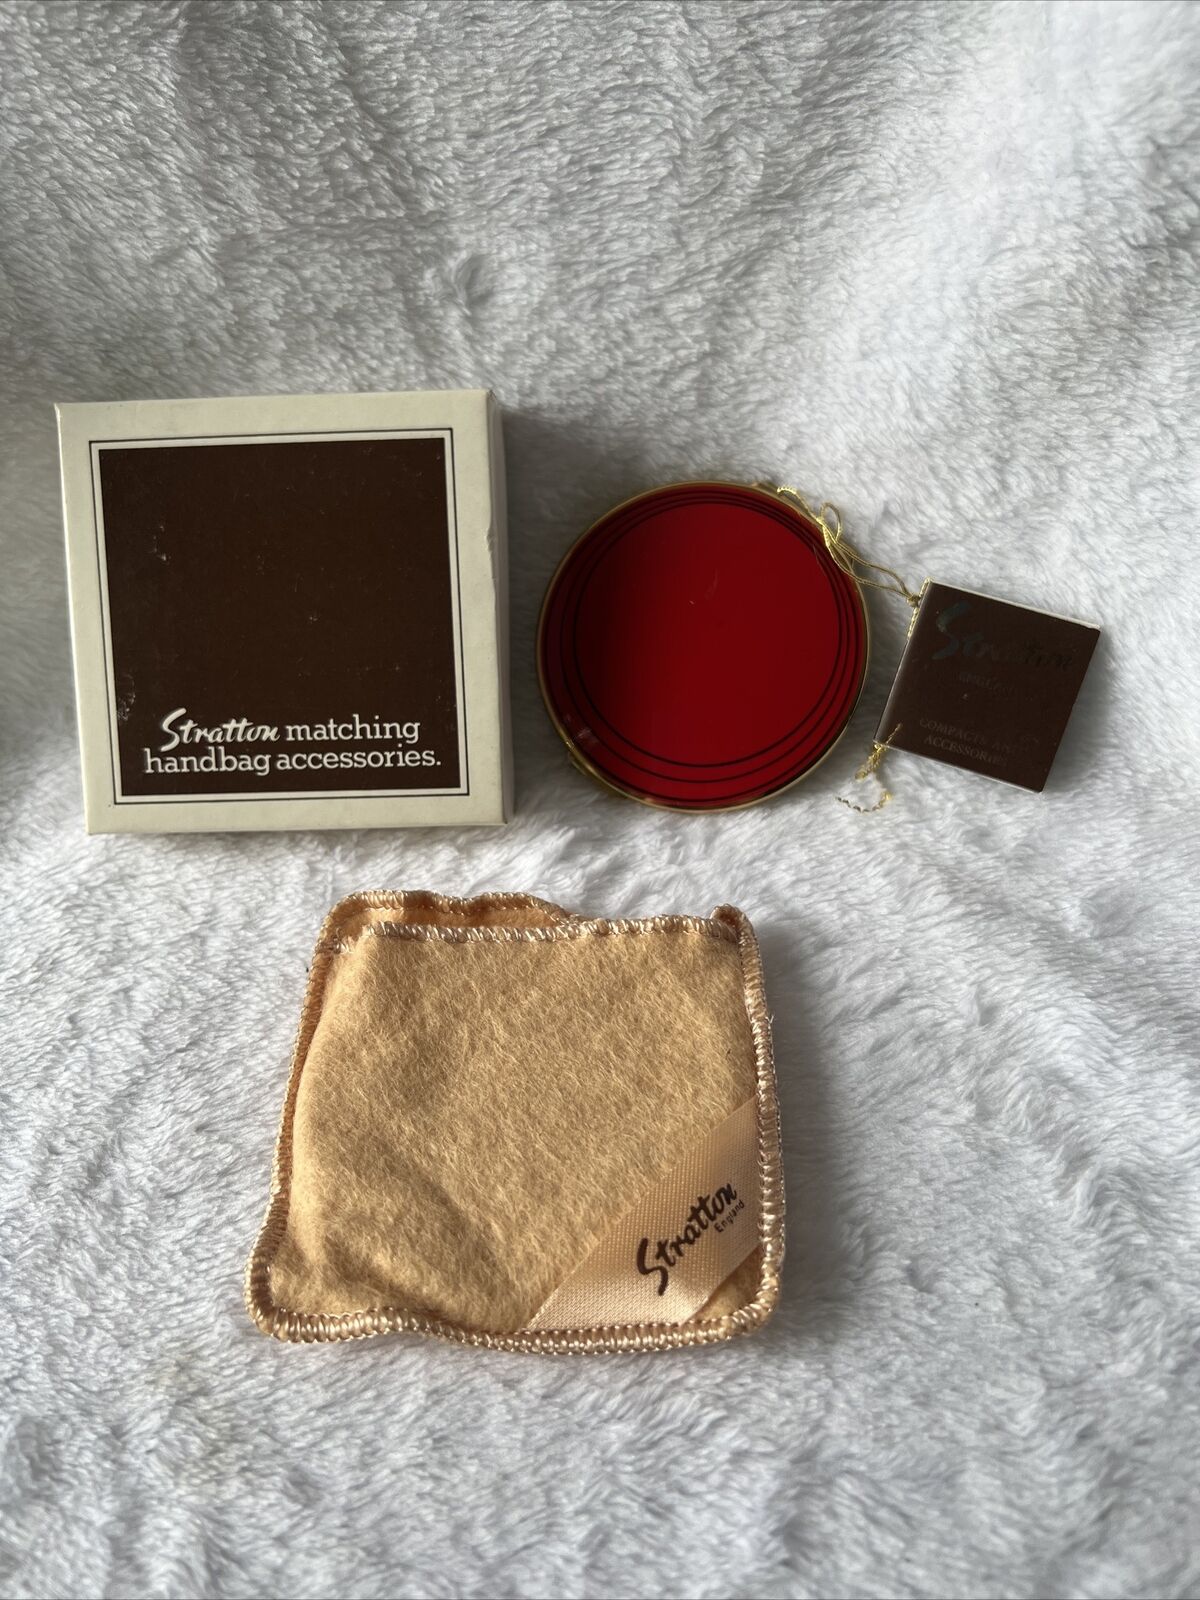 New Vintage Red Compact Mirror by Stratton Matching Handbag Accessories